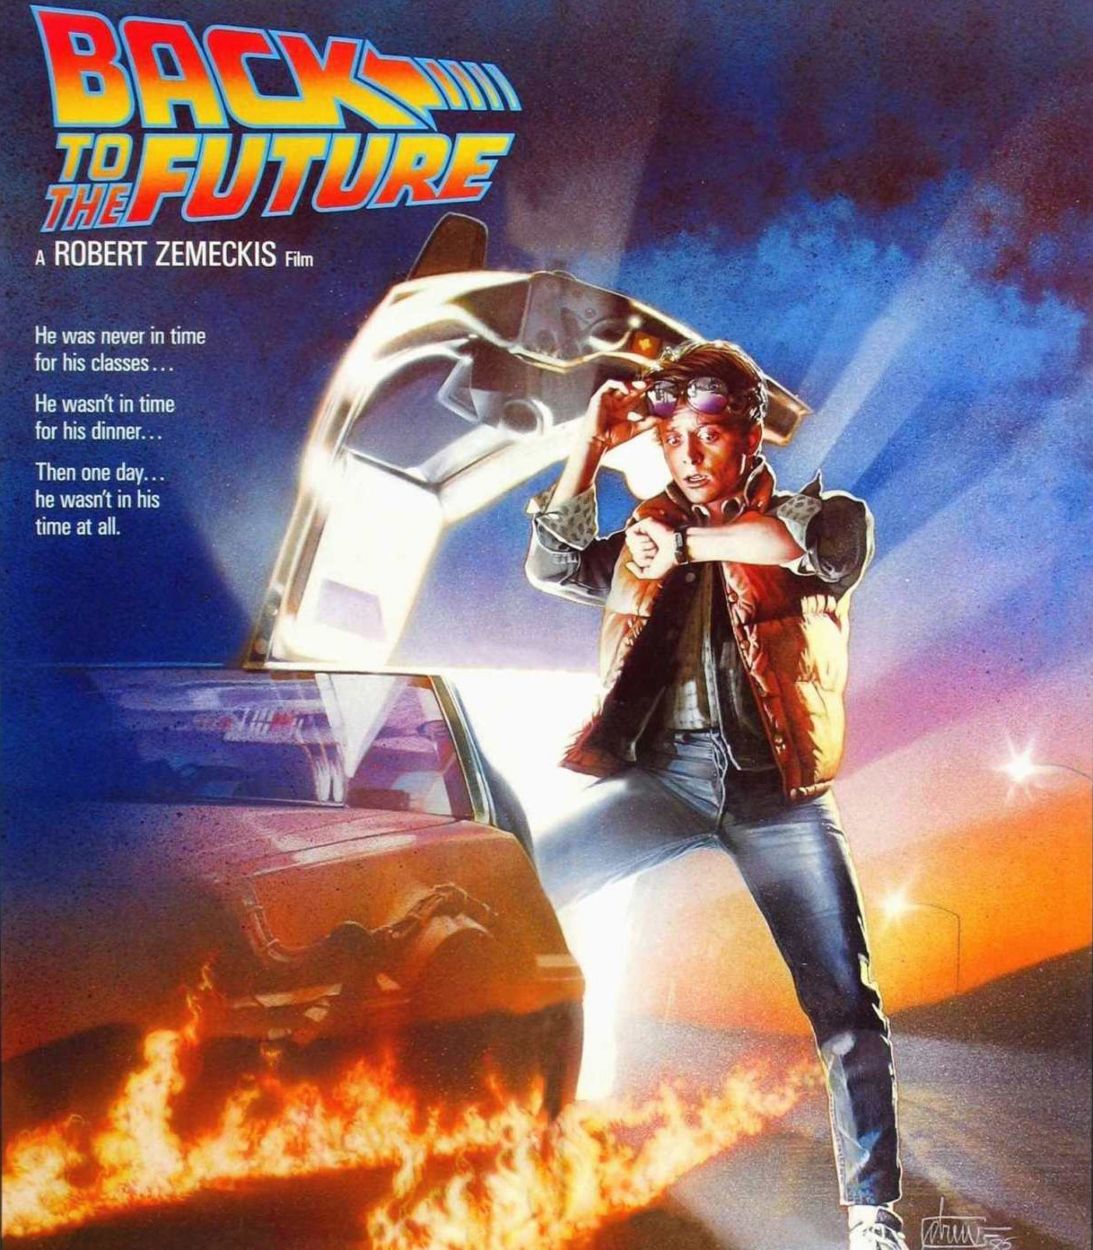 back to the future poster TLDR vertical